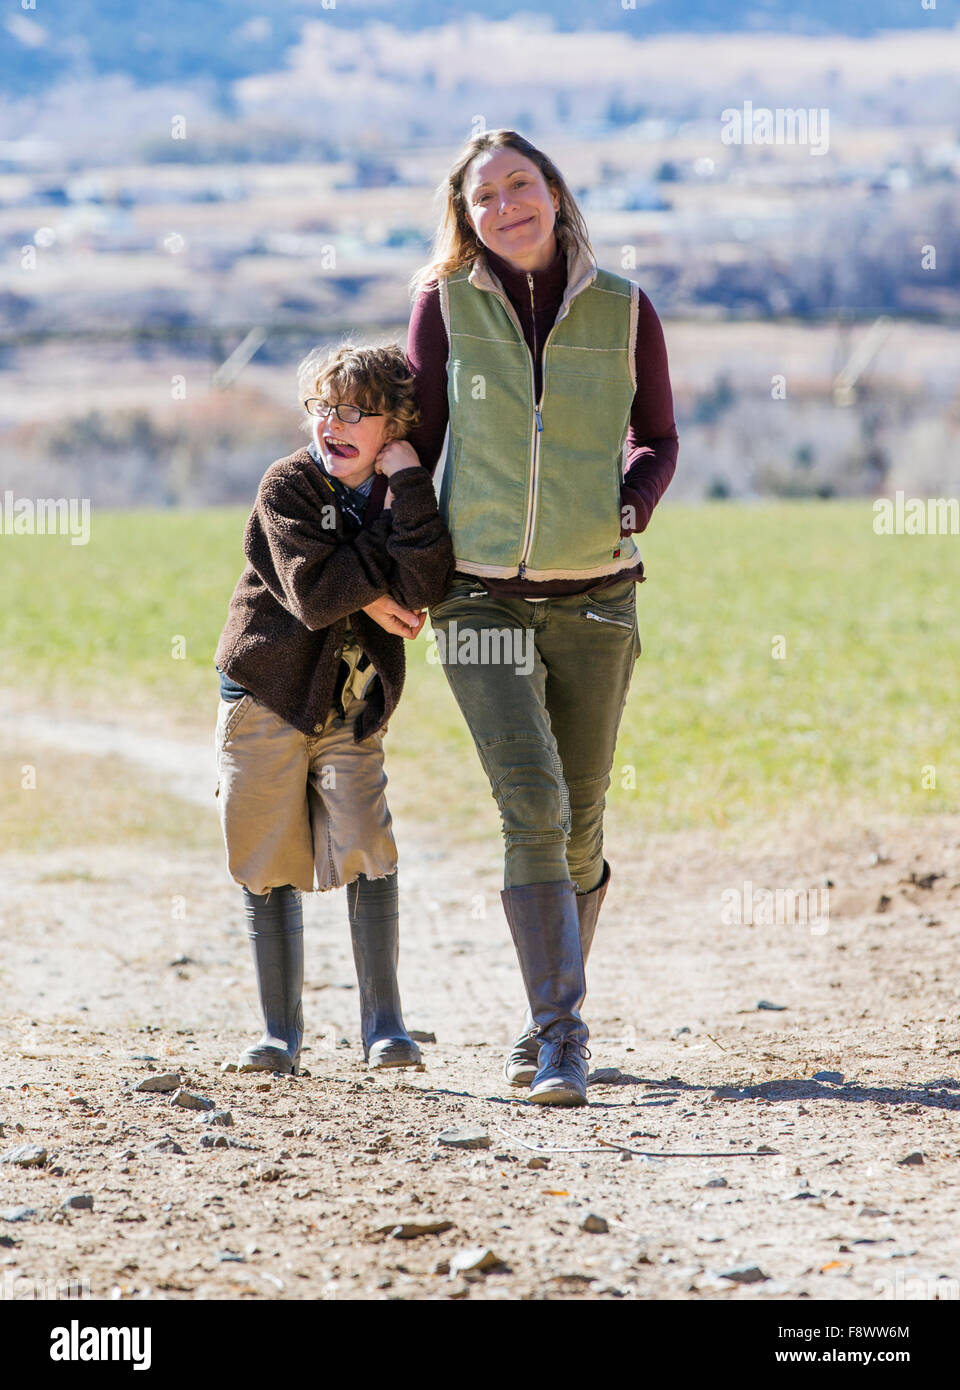 Attractive mother and young son walking along dirt path on ranch Stock Photo